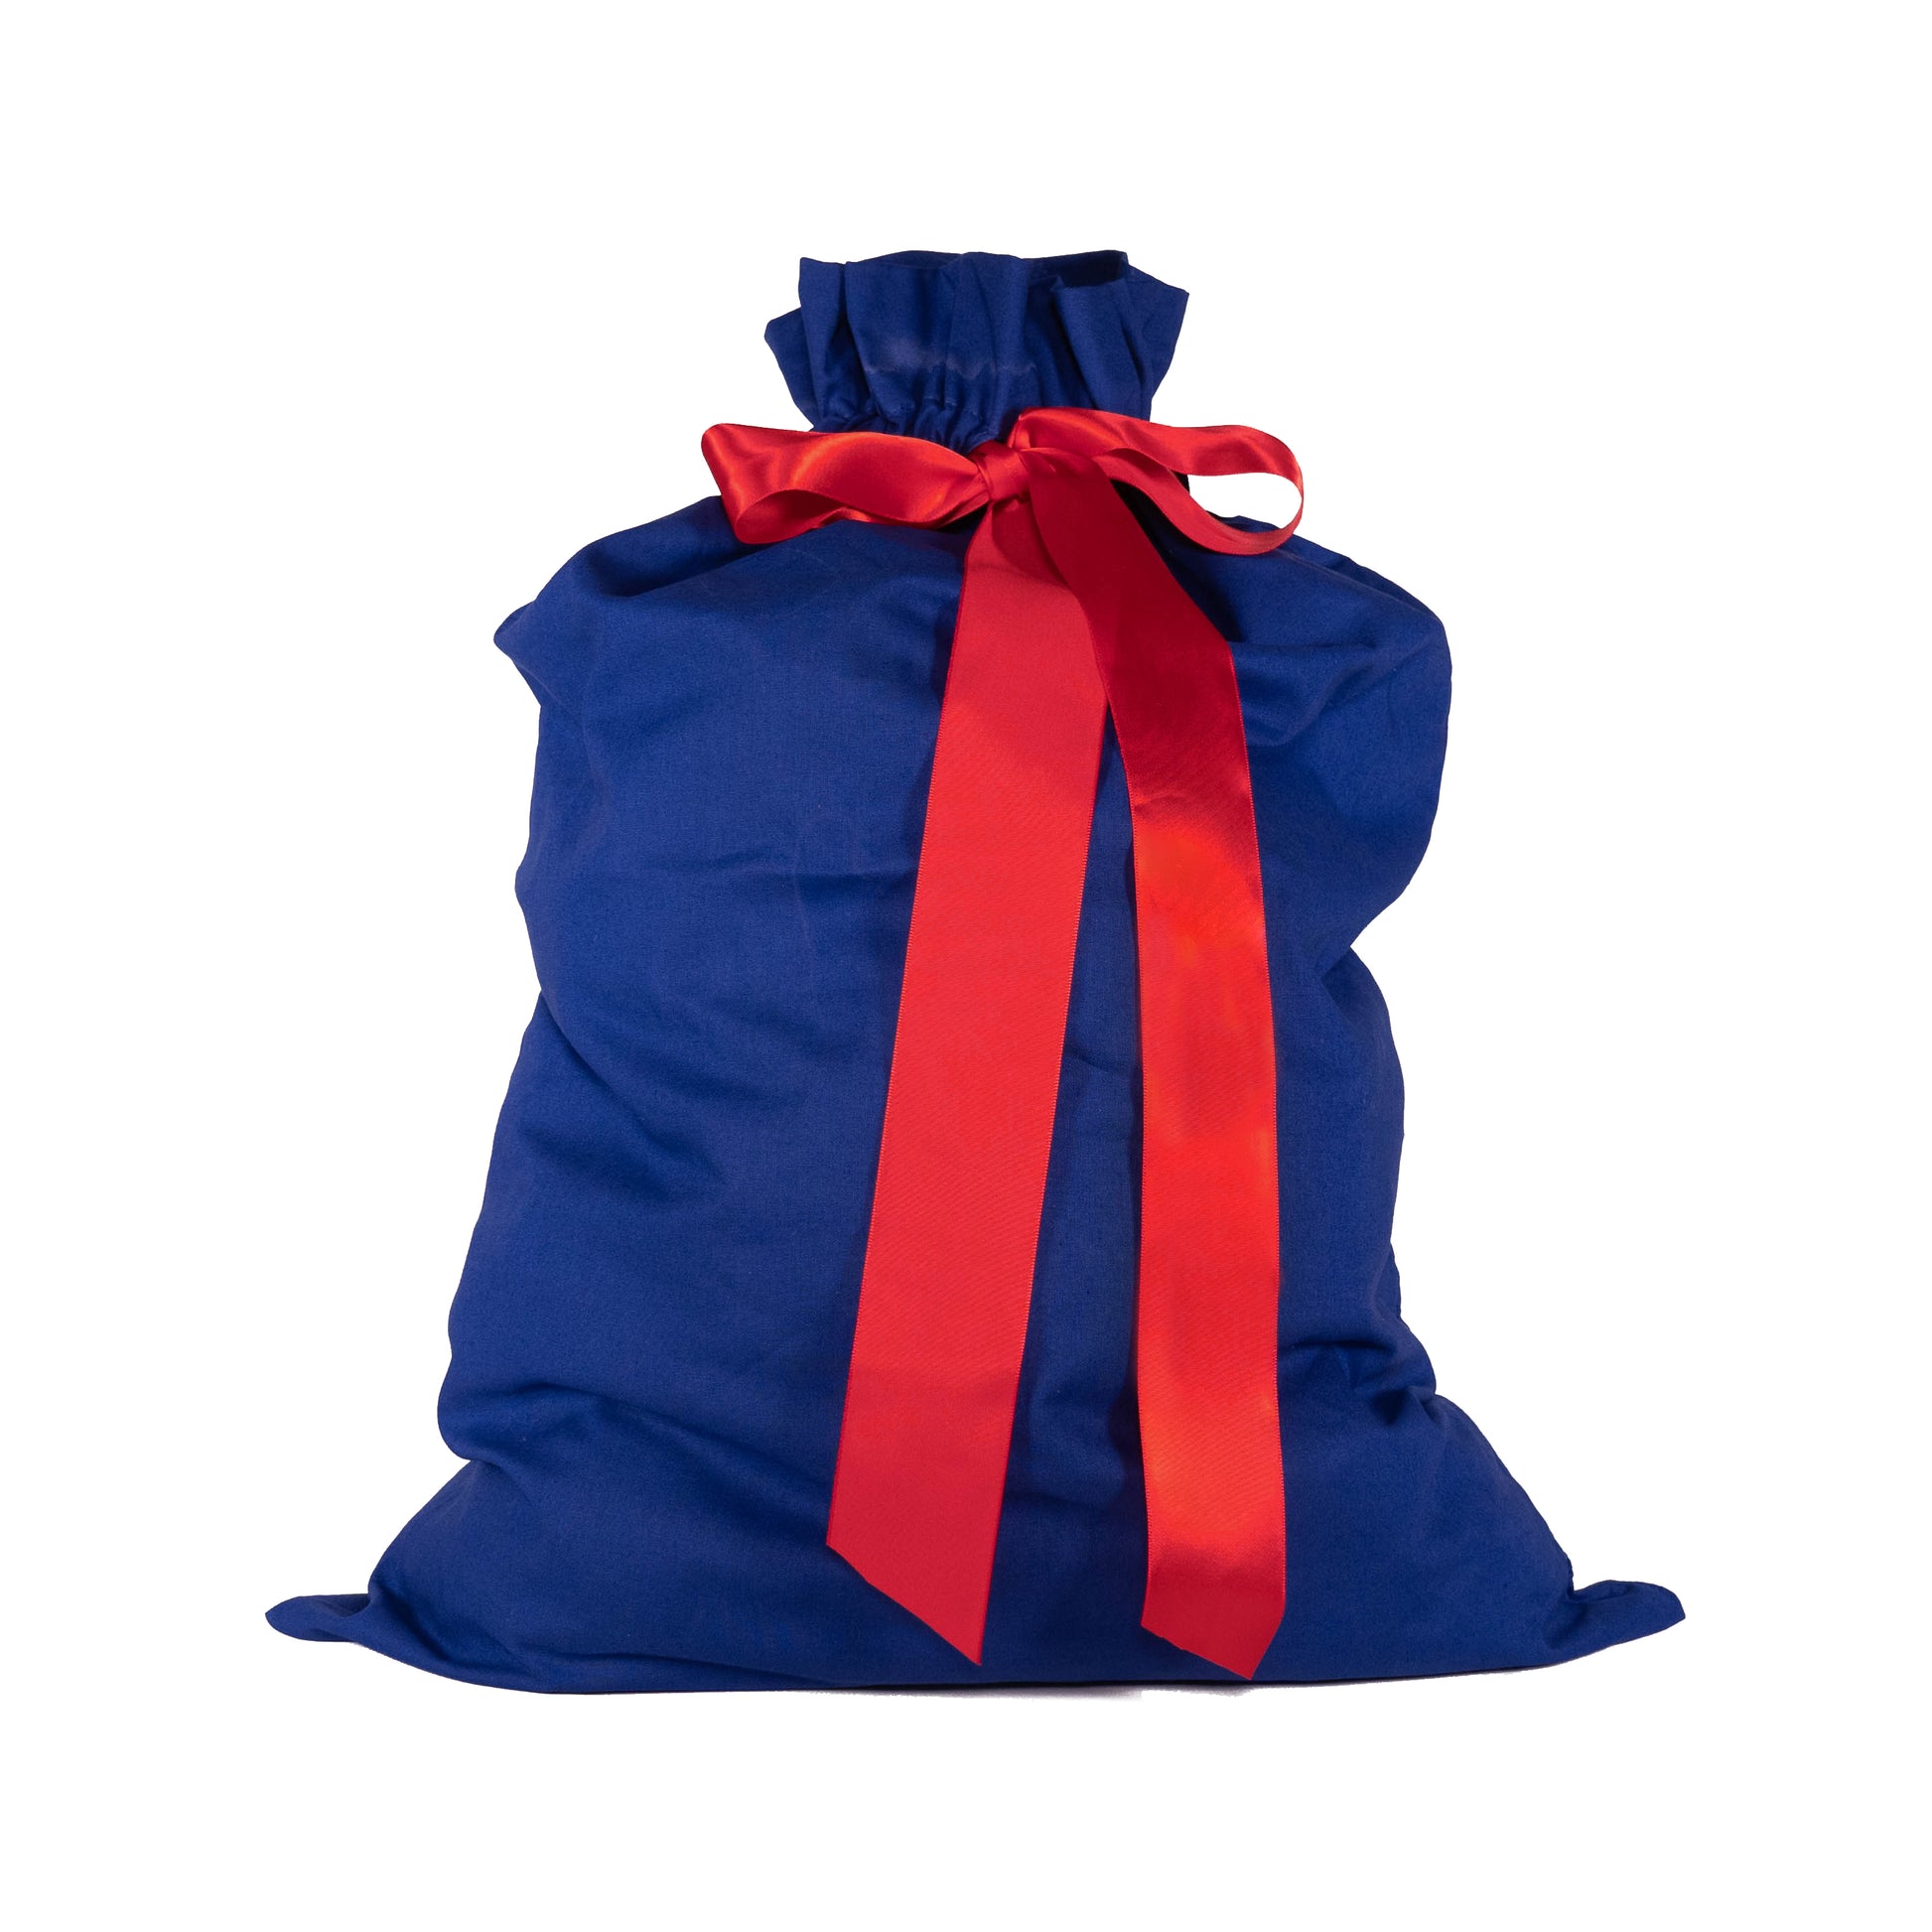 Classic Folding Box / 15 liters / navy-blue only 26,95 €